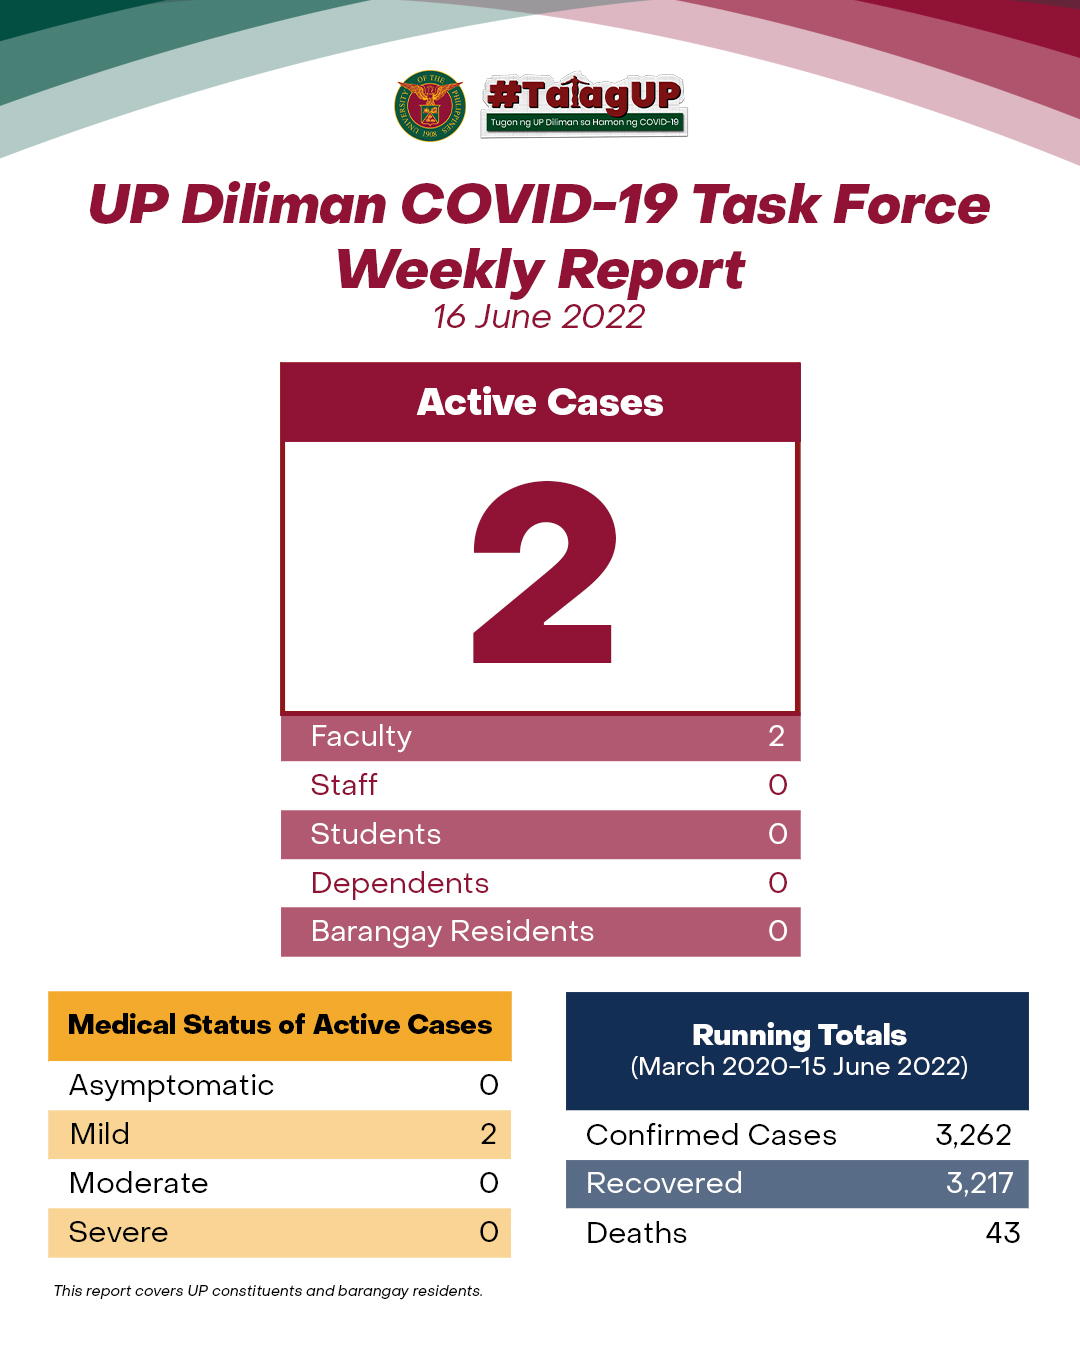 UP Diliman COVID-19 Task Force Weekly Report (16 June 2022)